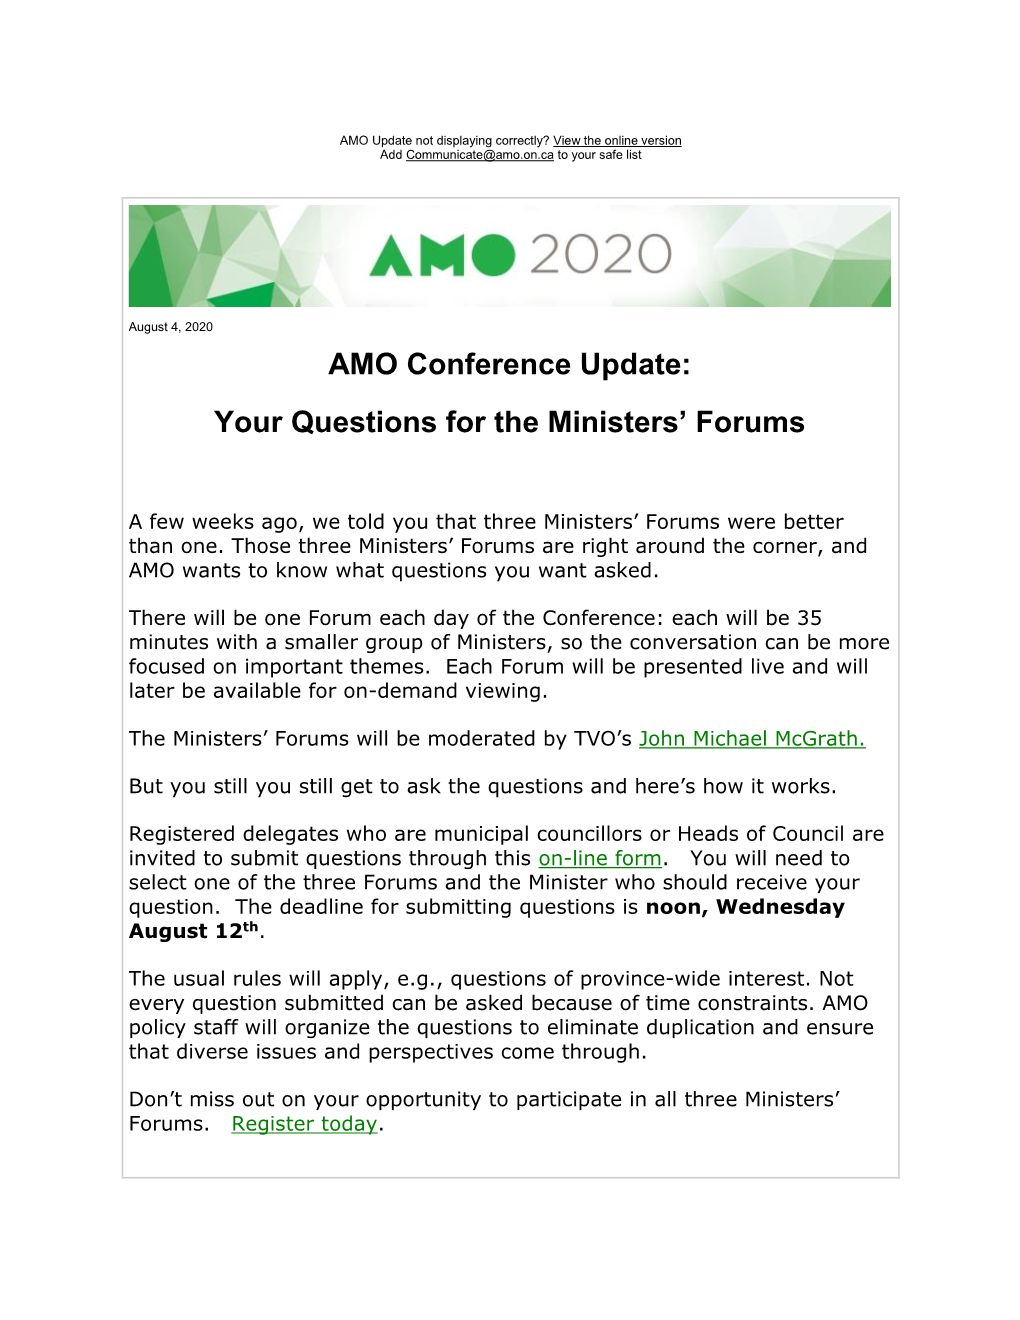 AMO Conference Update